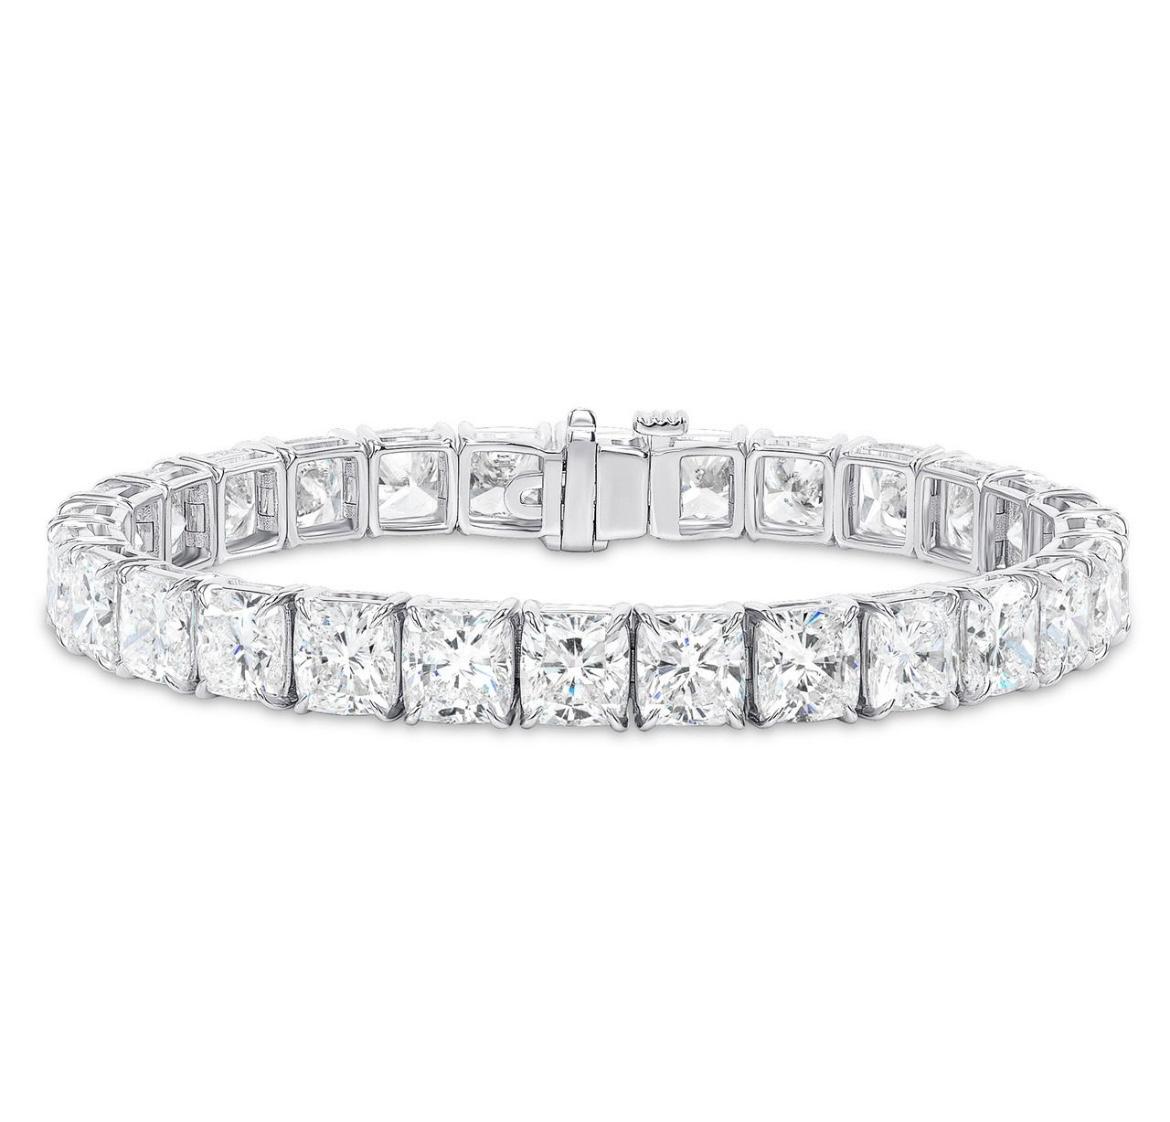 A magnificent tennis bracelet featuring 32 Cushion Cut Diamonds, each weighing 1.0 Carats for a total weight of 32.20 Carats. 
Each stone is certified by GIA as DEF in color and VVS-VS in clarity. 

Handmade in Platinum. 
Measuring 7 inches. 